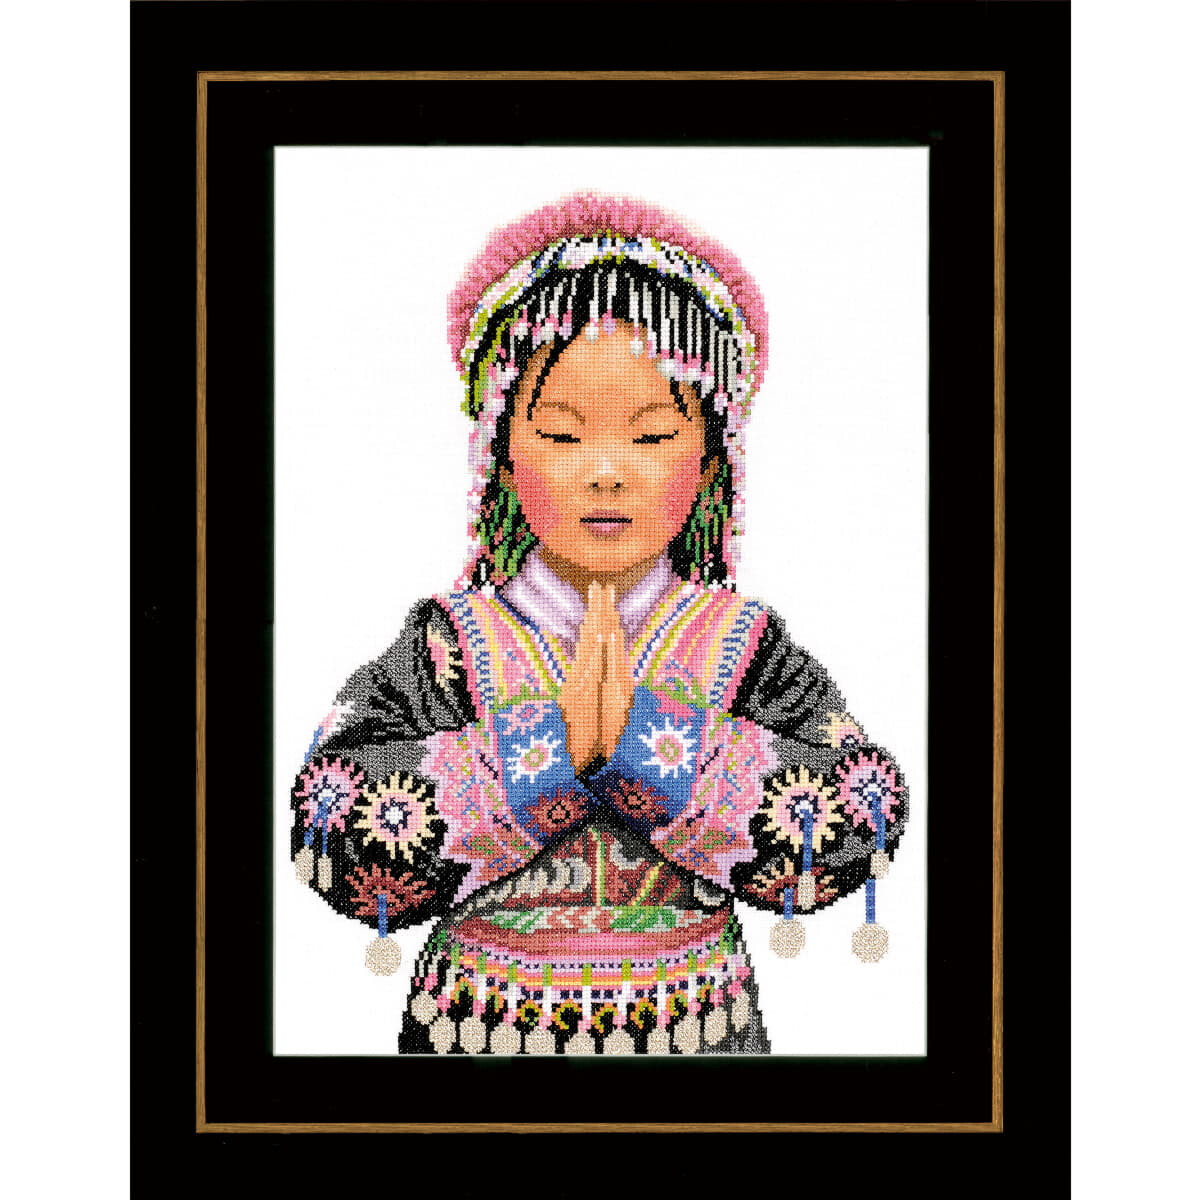 An embroidery package (Lanarte) shows an Asian girl in...